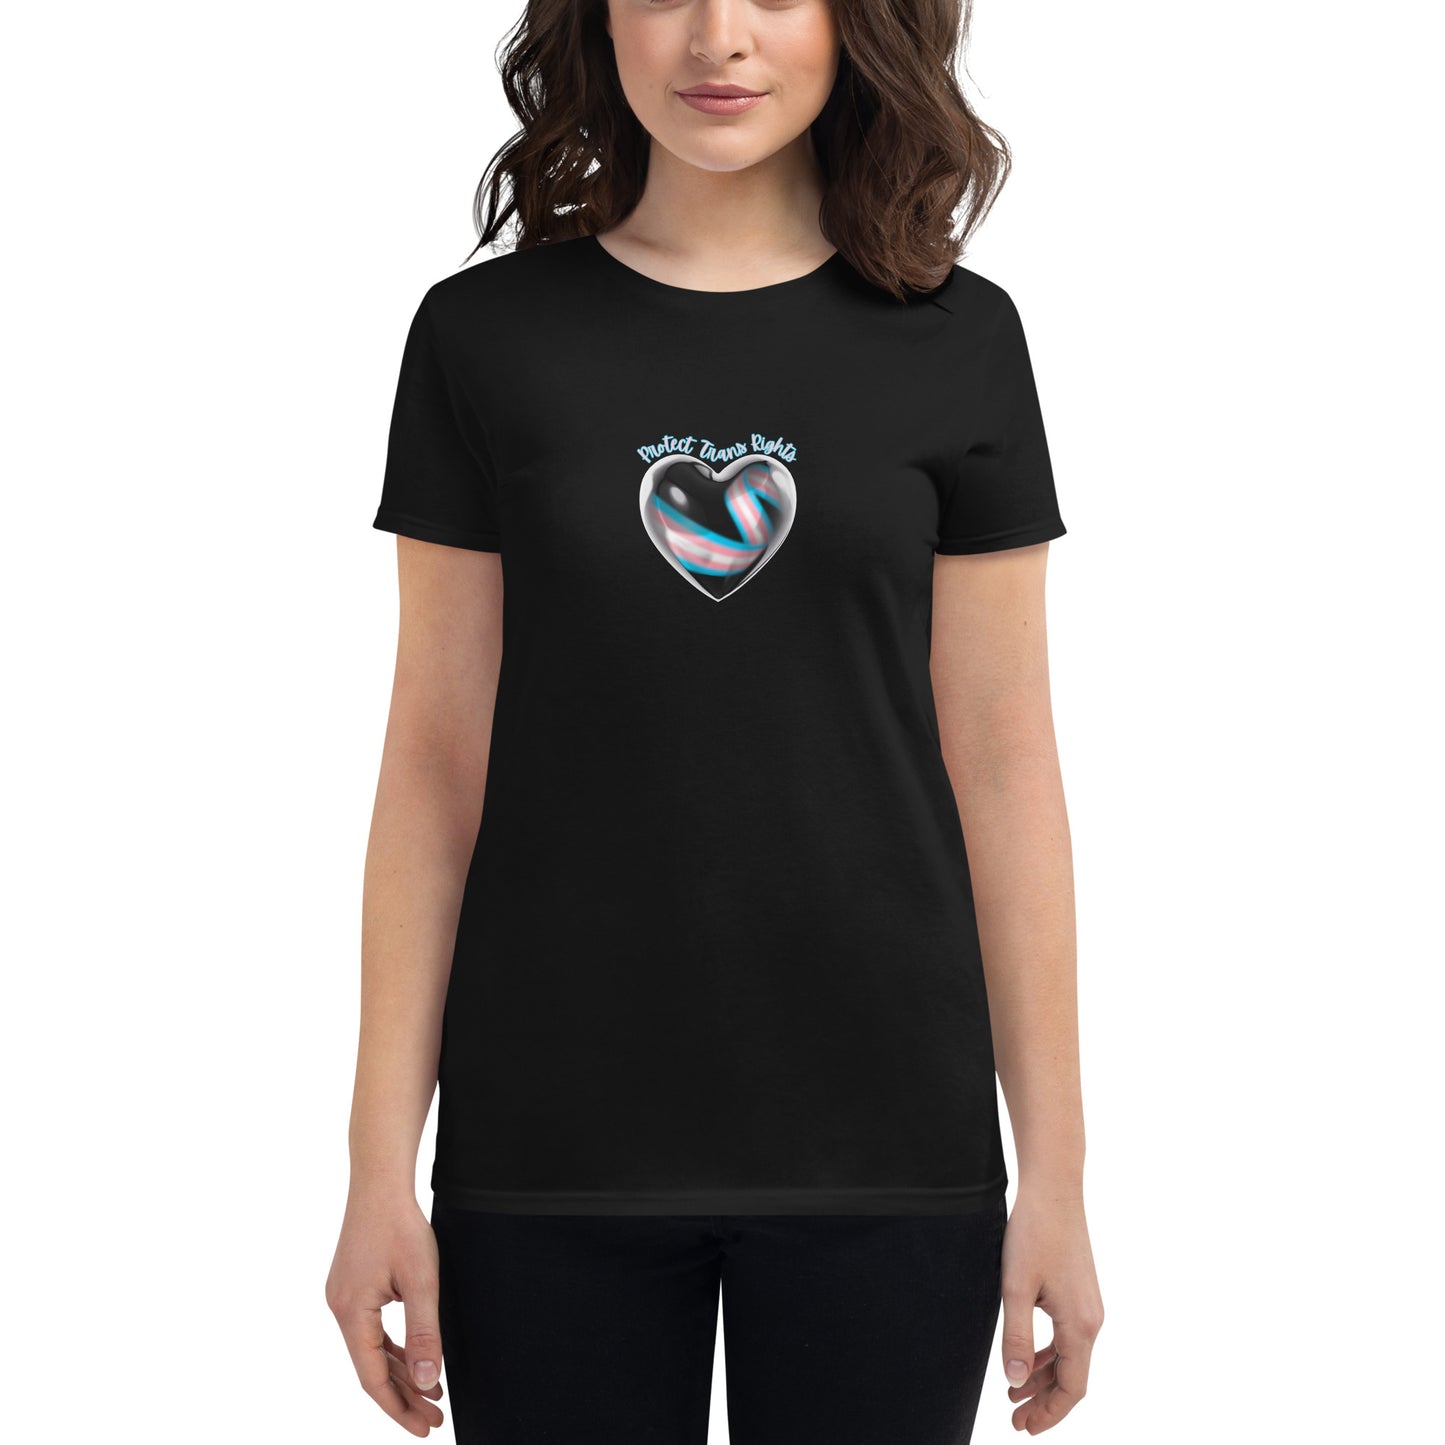 Protect Trans Rights - Women's short sleeve t-shirt